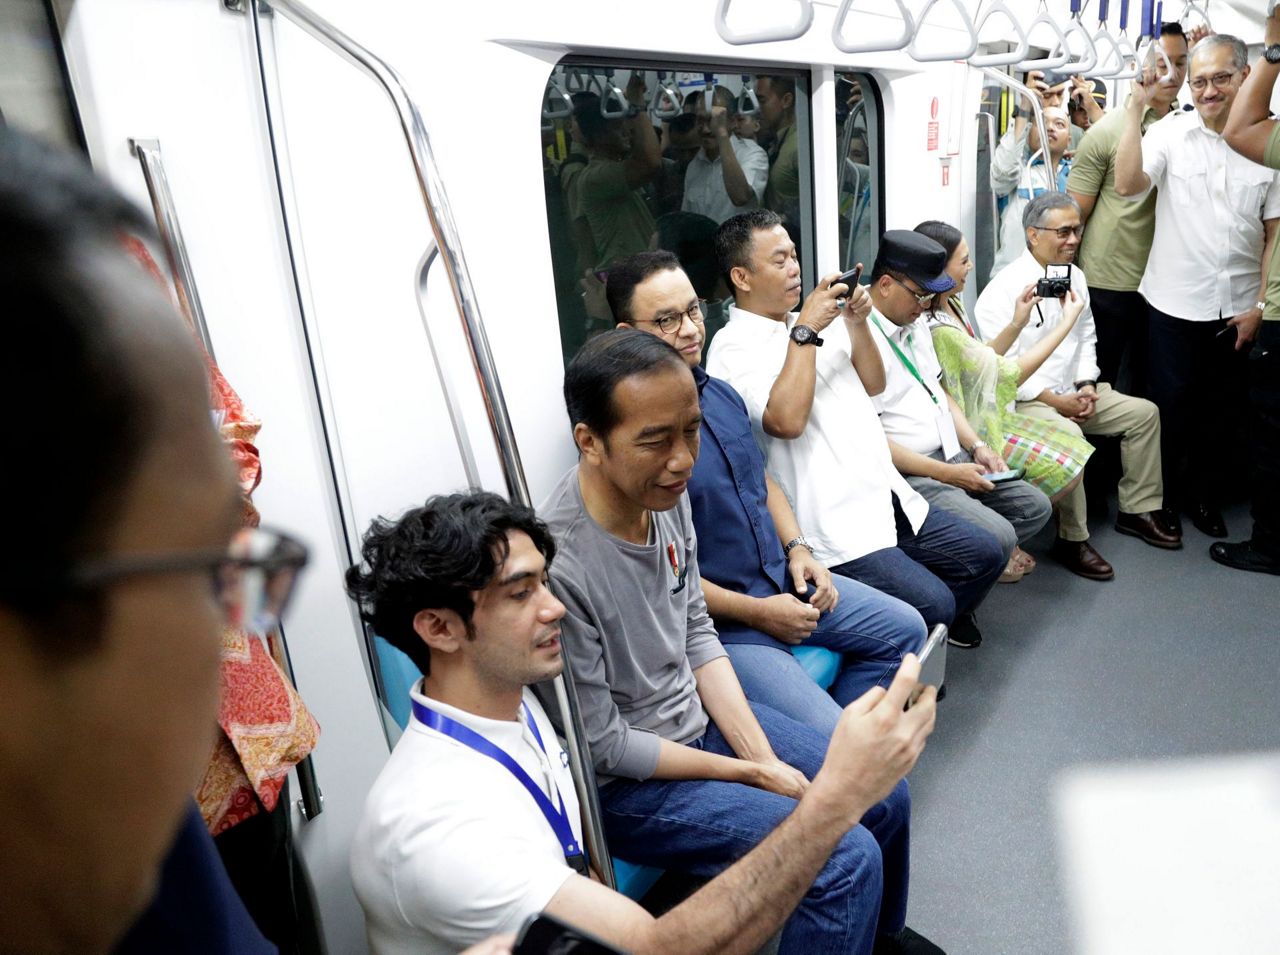 Indonesia's first subway opens in its gridlocked capital